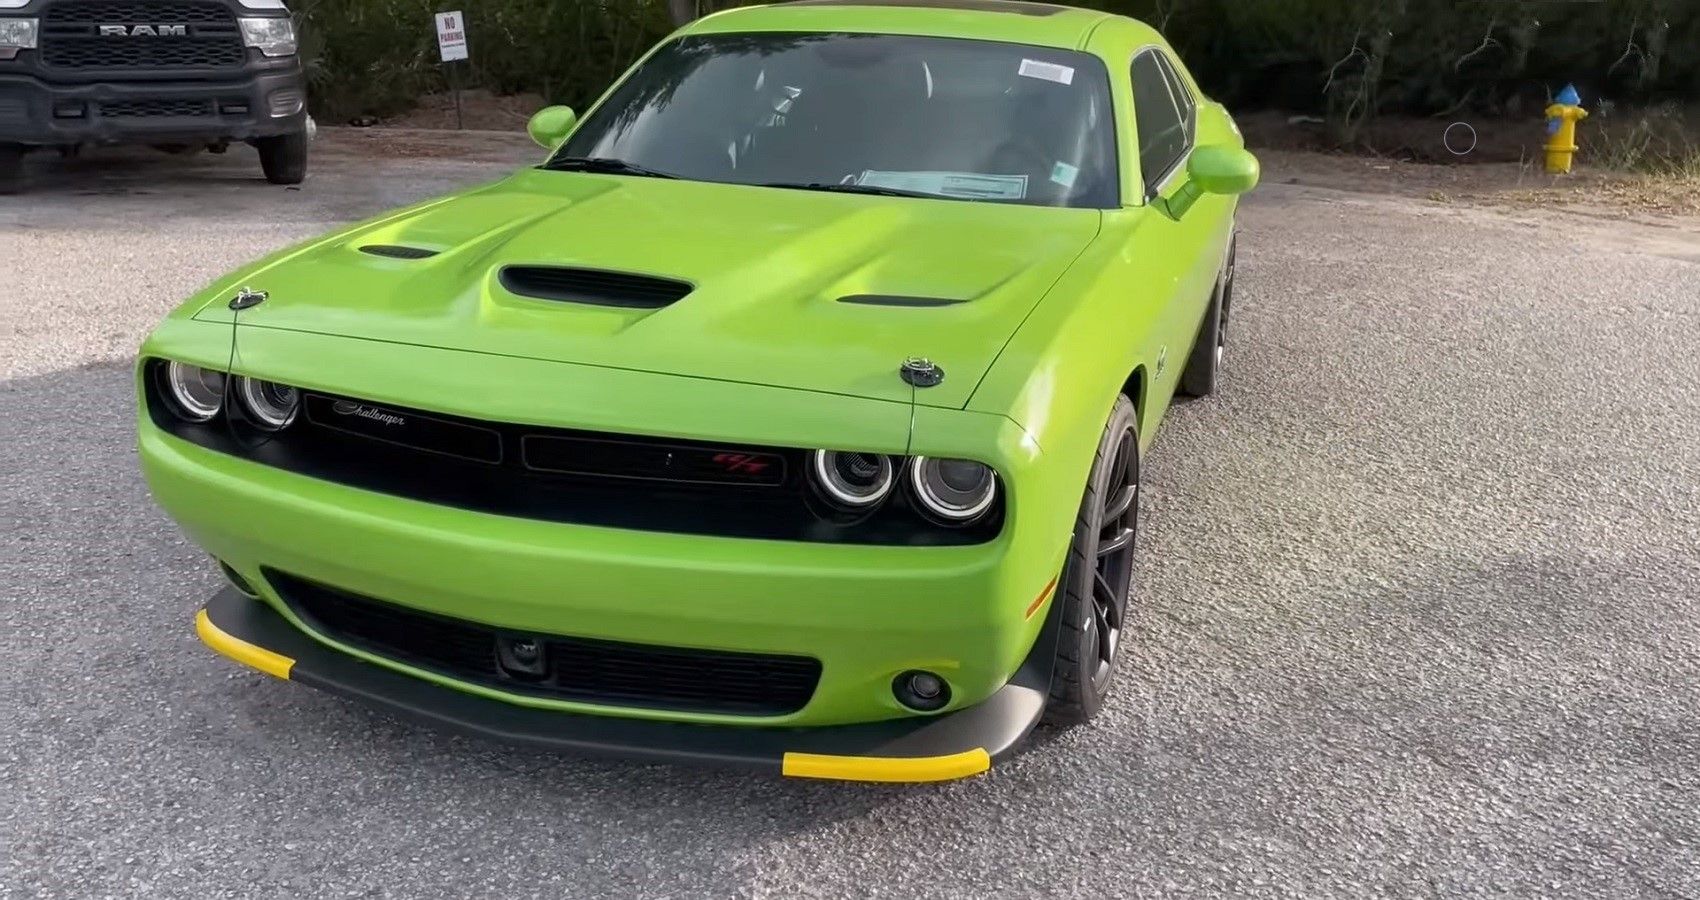 How The New Dodge Challenger '1320' Is The HalfPrice Alternative To